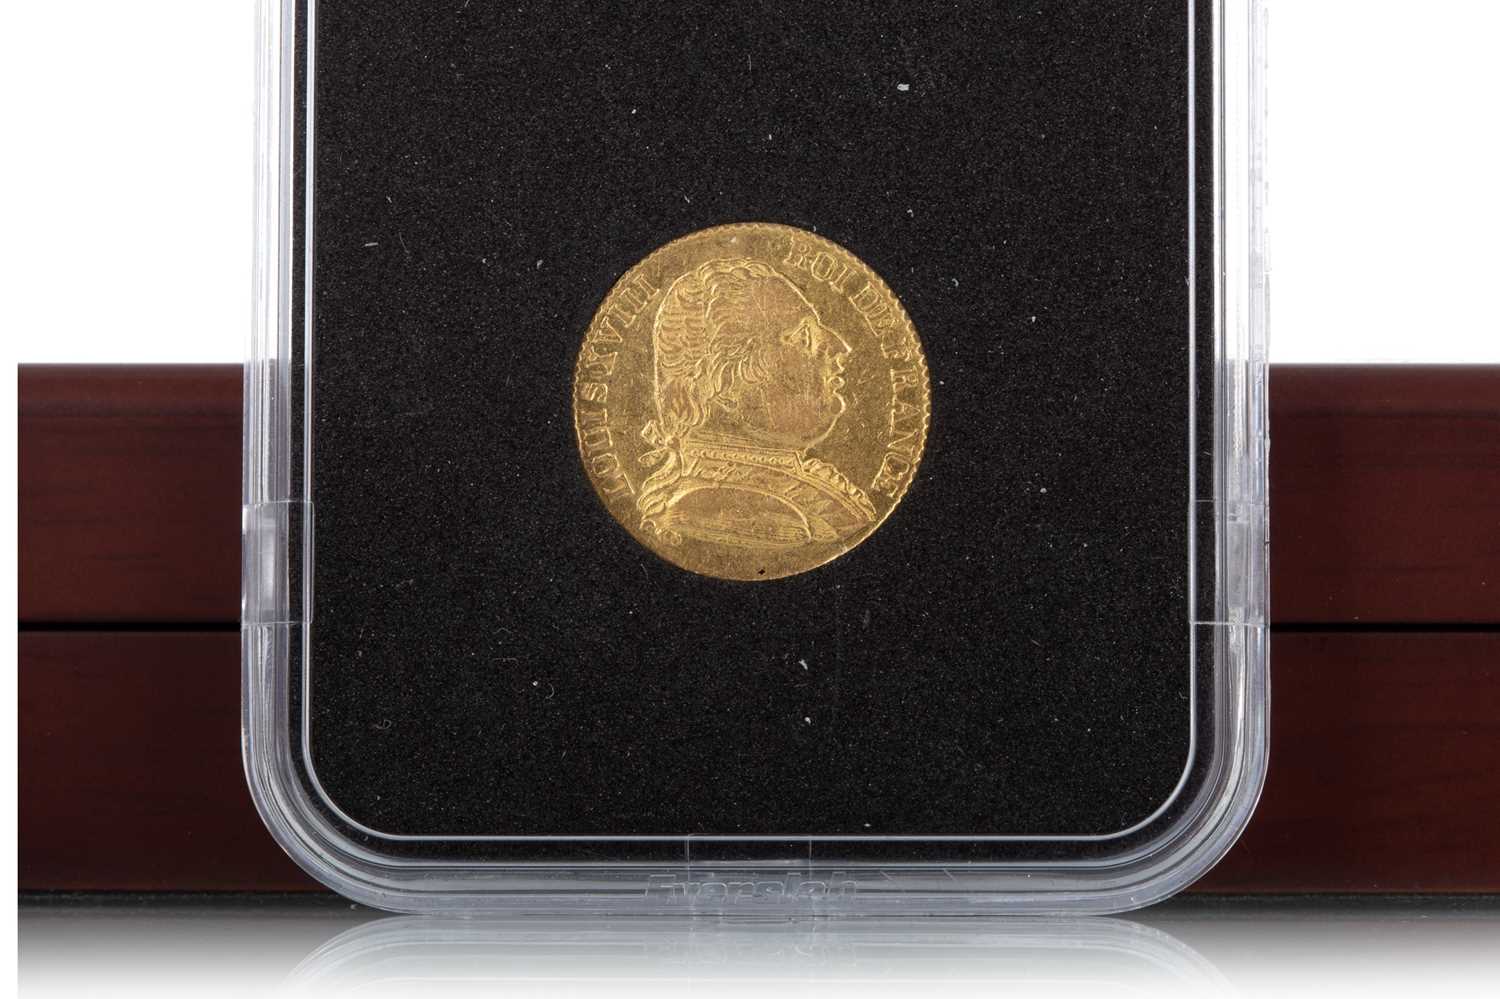 Lot 76 - KING LOUIS XVIII 20 FRANCS GOLD COIN